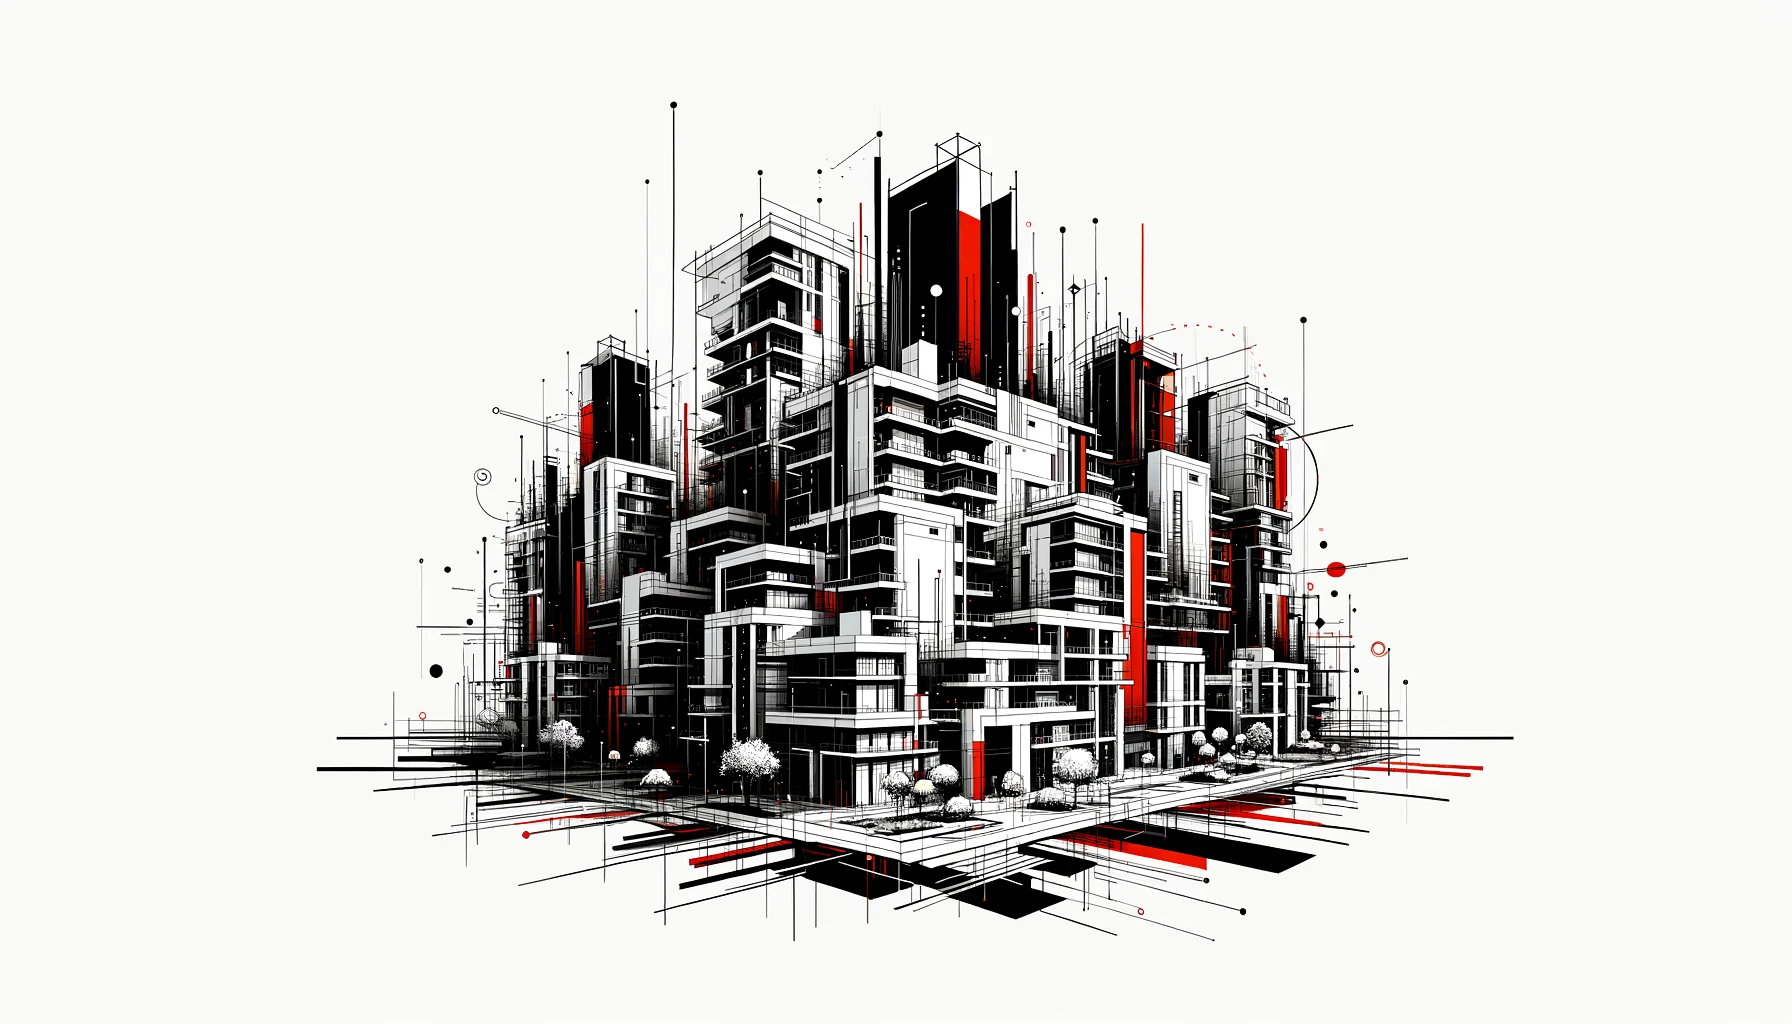 Abstract illustration of 'Condos For Sale', a stylized architectural complex with monochromatic buildings accented in red.